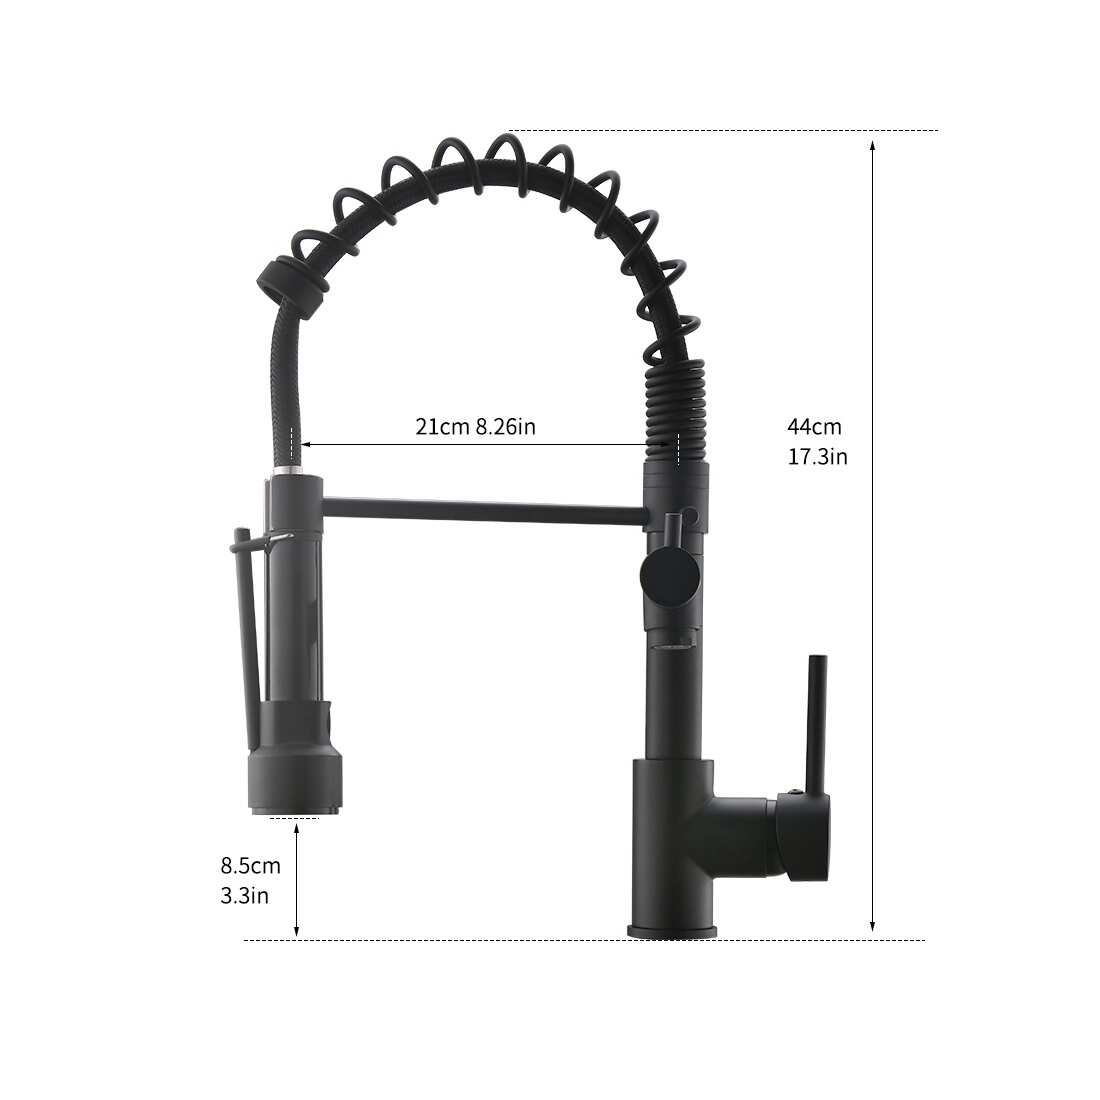 Black Kitchen Faucet Pull Down 2 Function Spray - 8.26*3.3*17.3